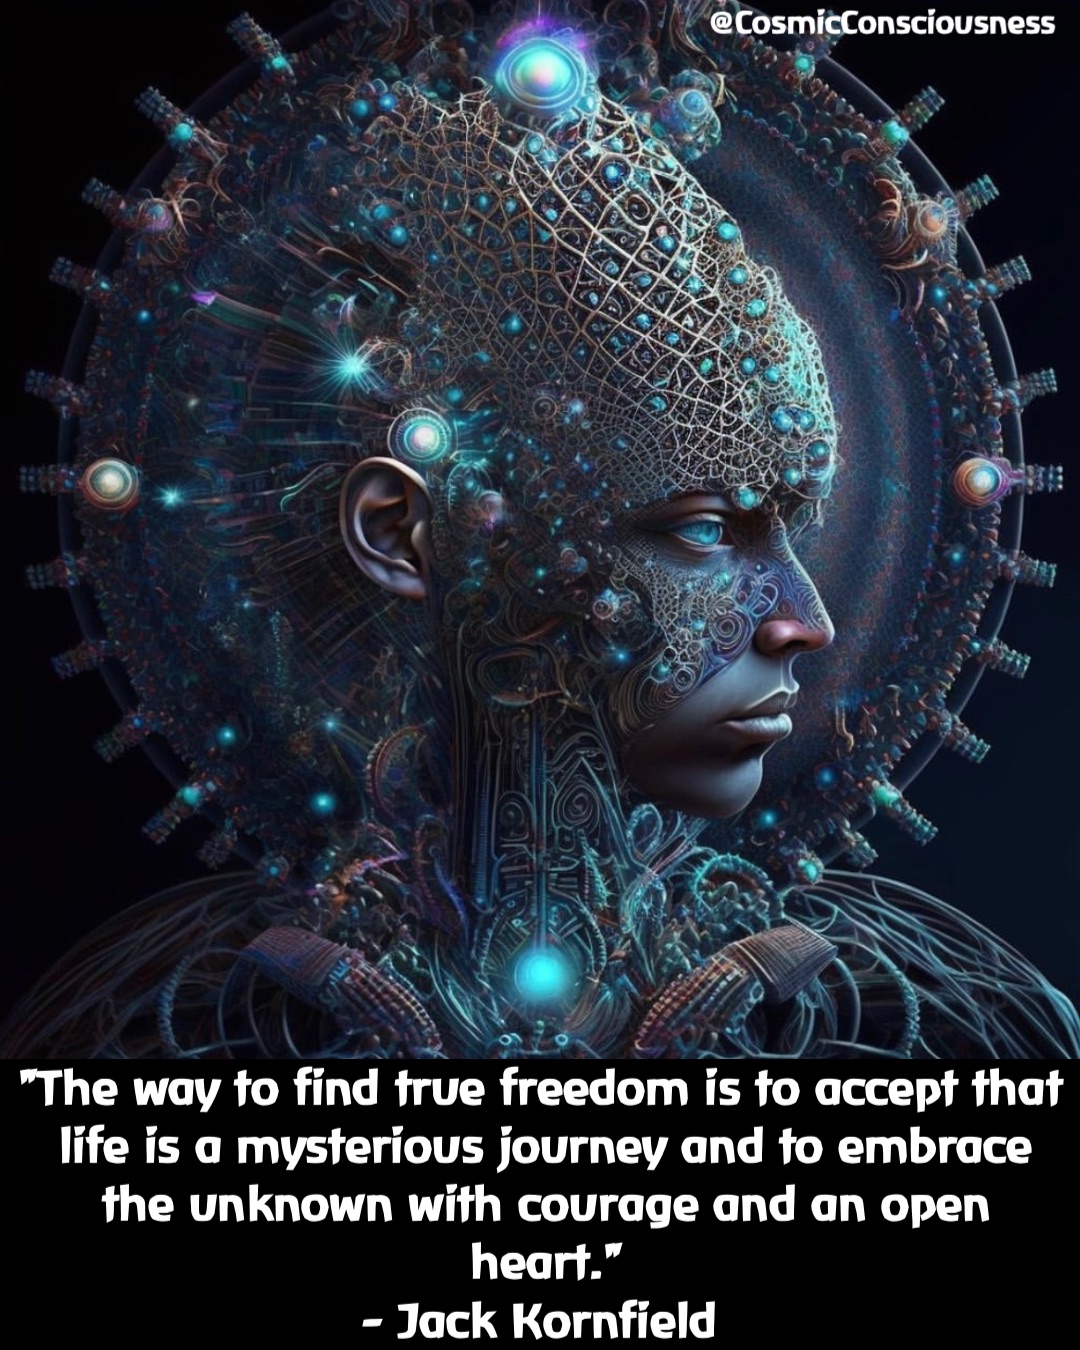 "The way to find true freedom is to accept that life is a mysterious journey and to embrace the unknown with courage and an open heart." 
- Jack Kornfield @CosmicConsciousness